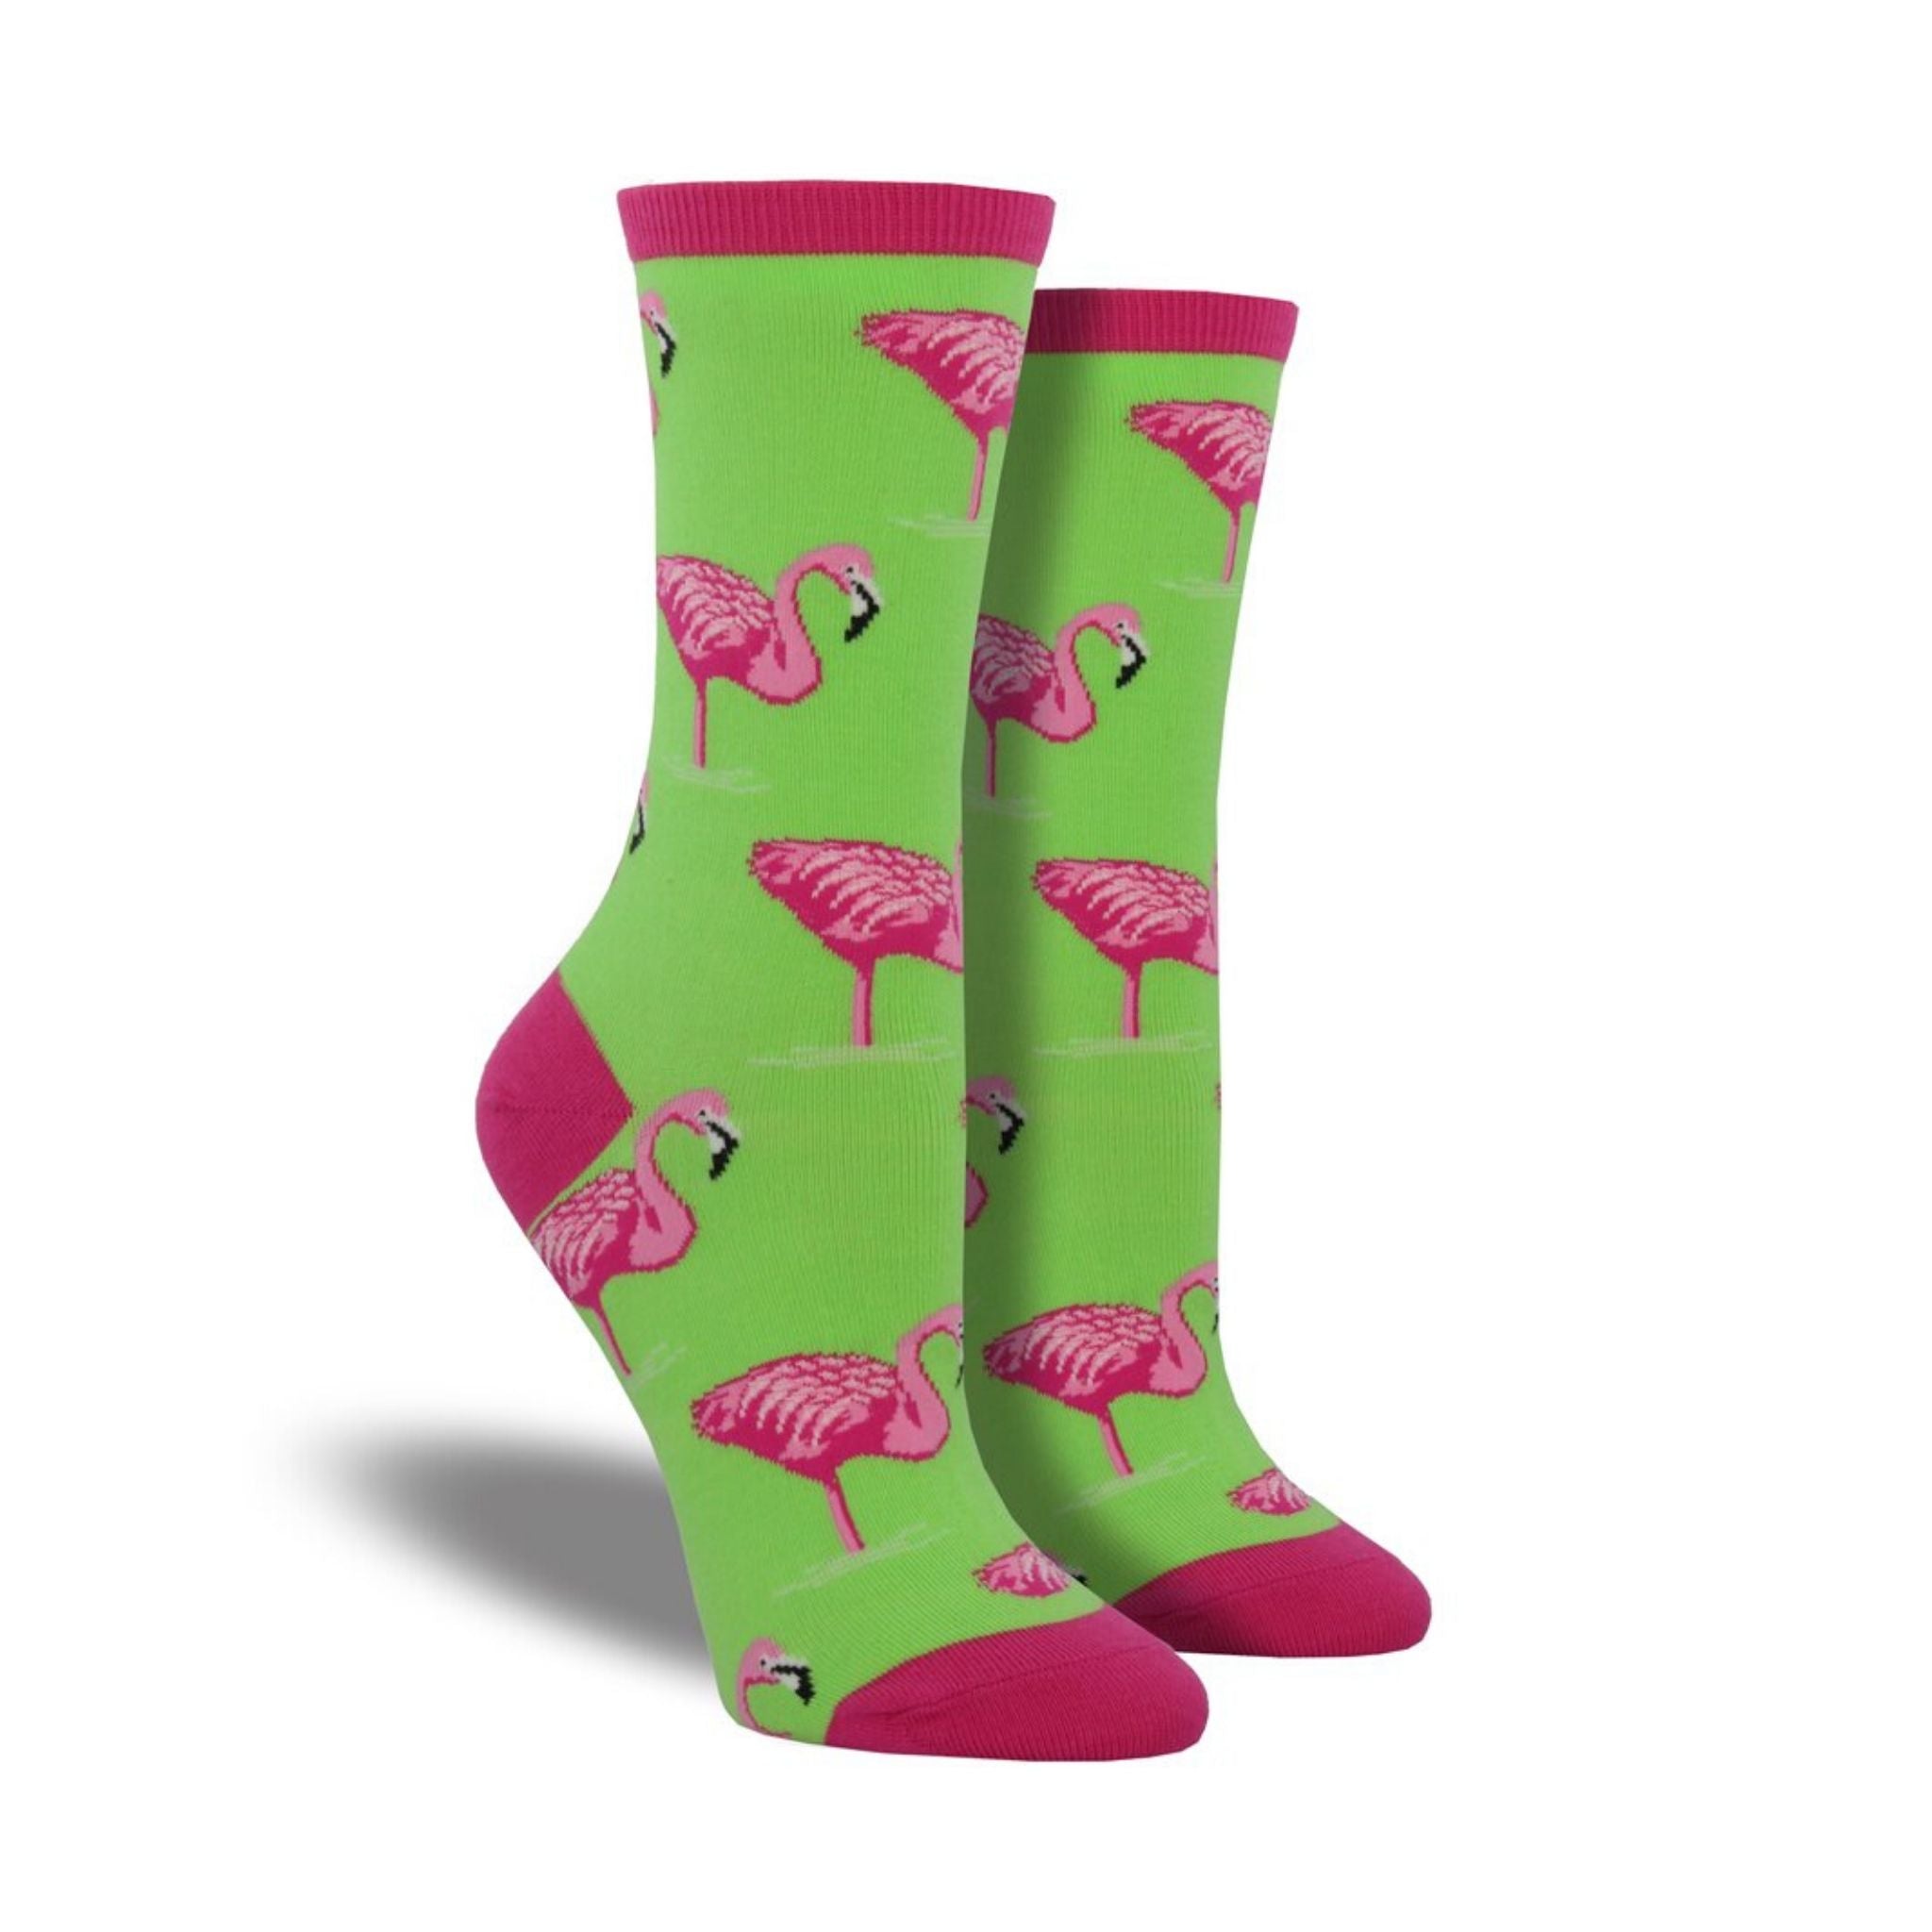 Green socks with pink accents featuring flamingos